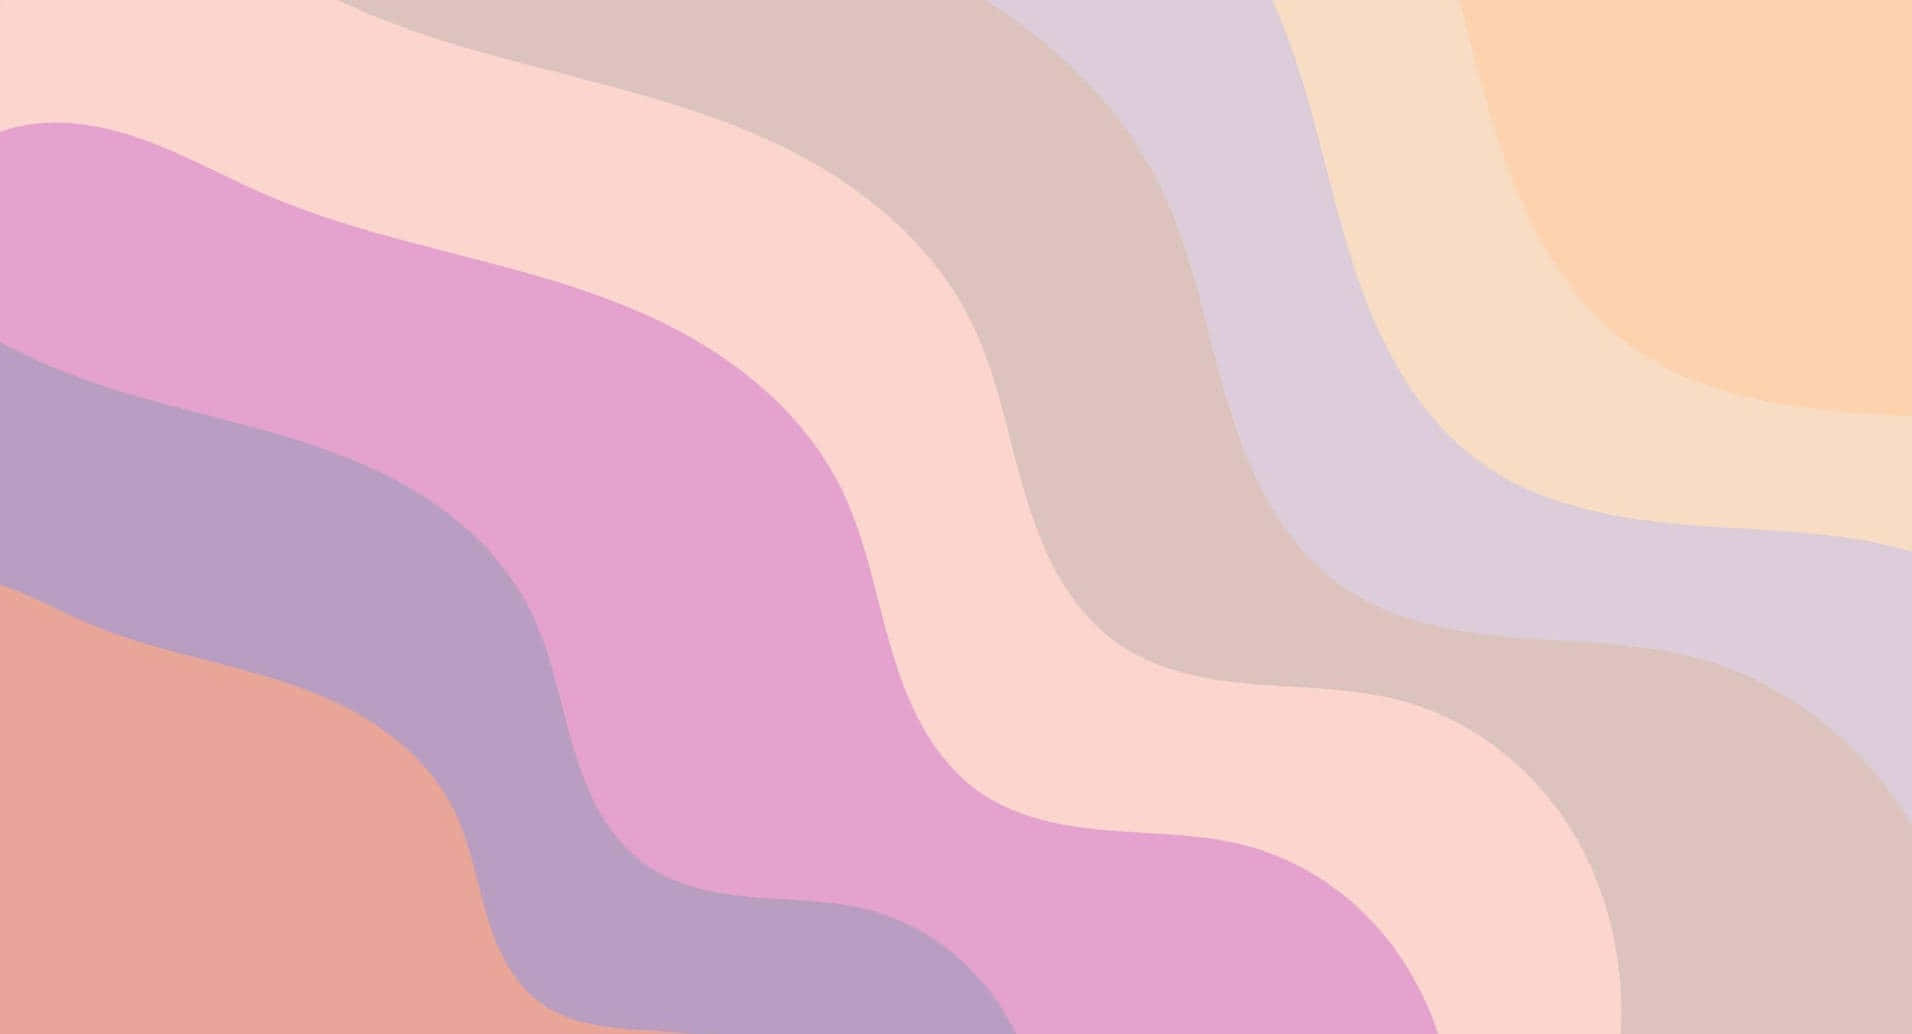 Abstract Art in Dreamy Pastel Colors